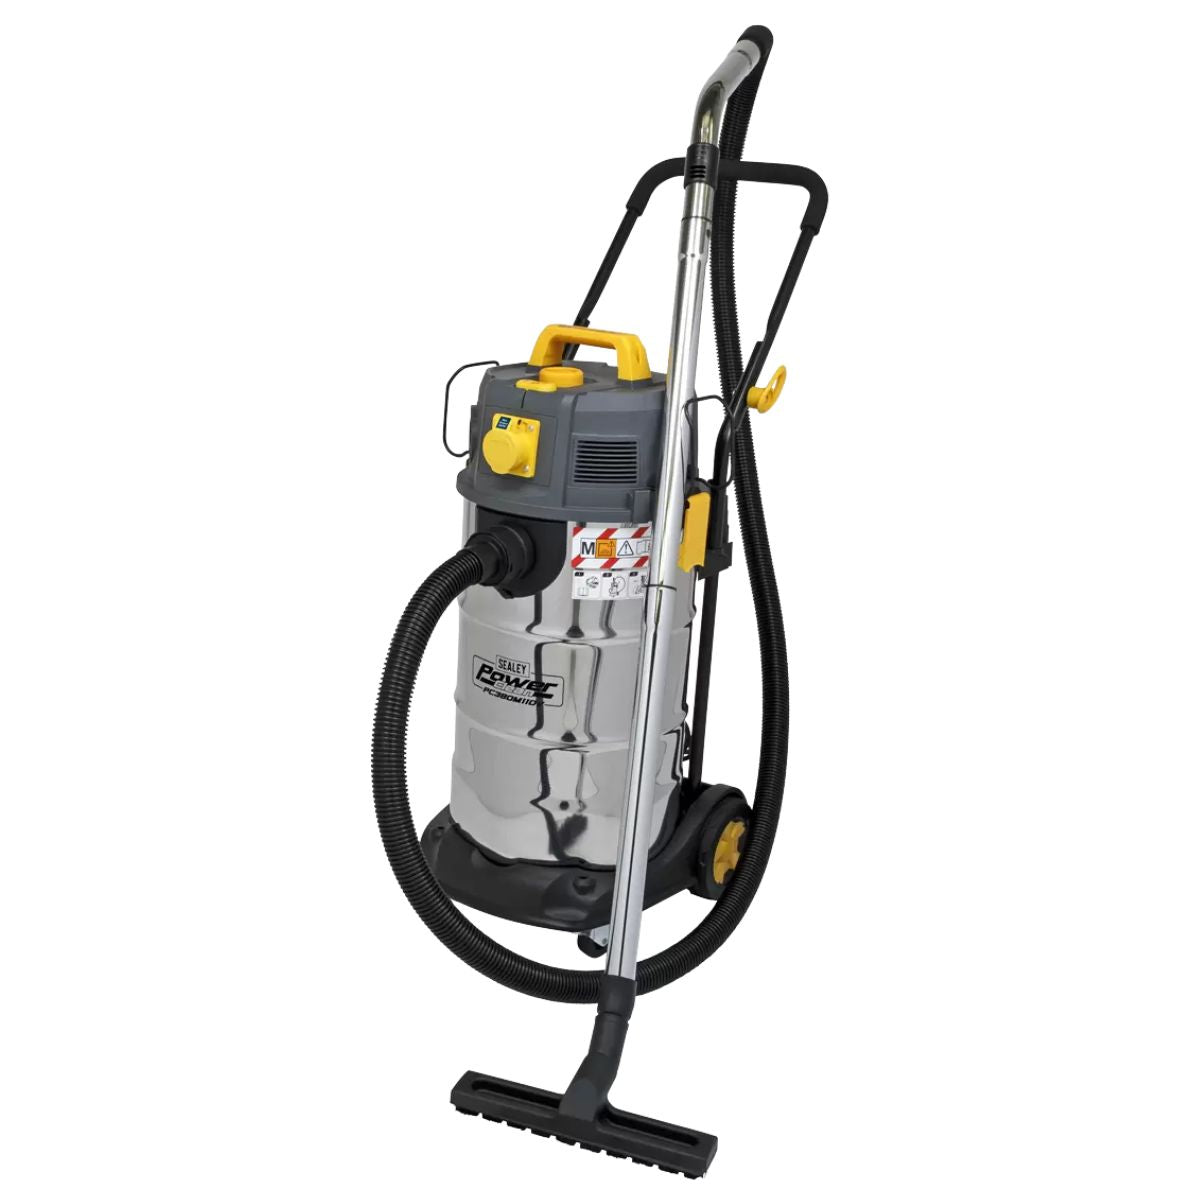 Sealey PC380M110V Vacuum Cleaner Industrial Dust-Free Wet/Dry 38L 1100W/110V Stainless Steel Drum